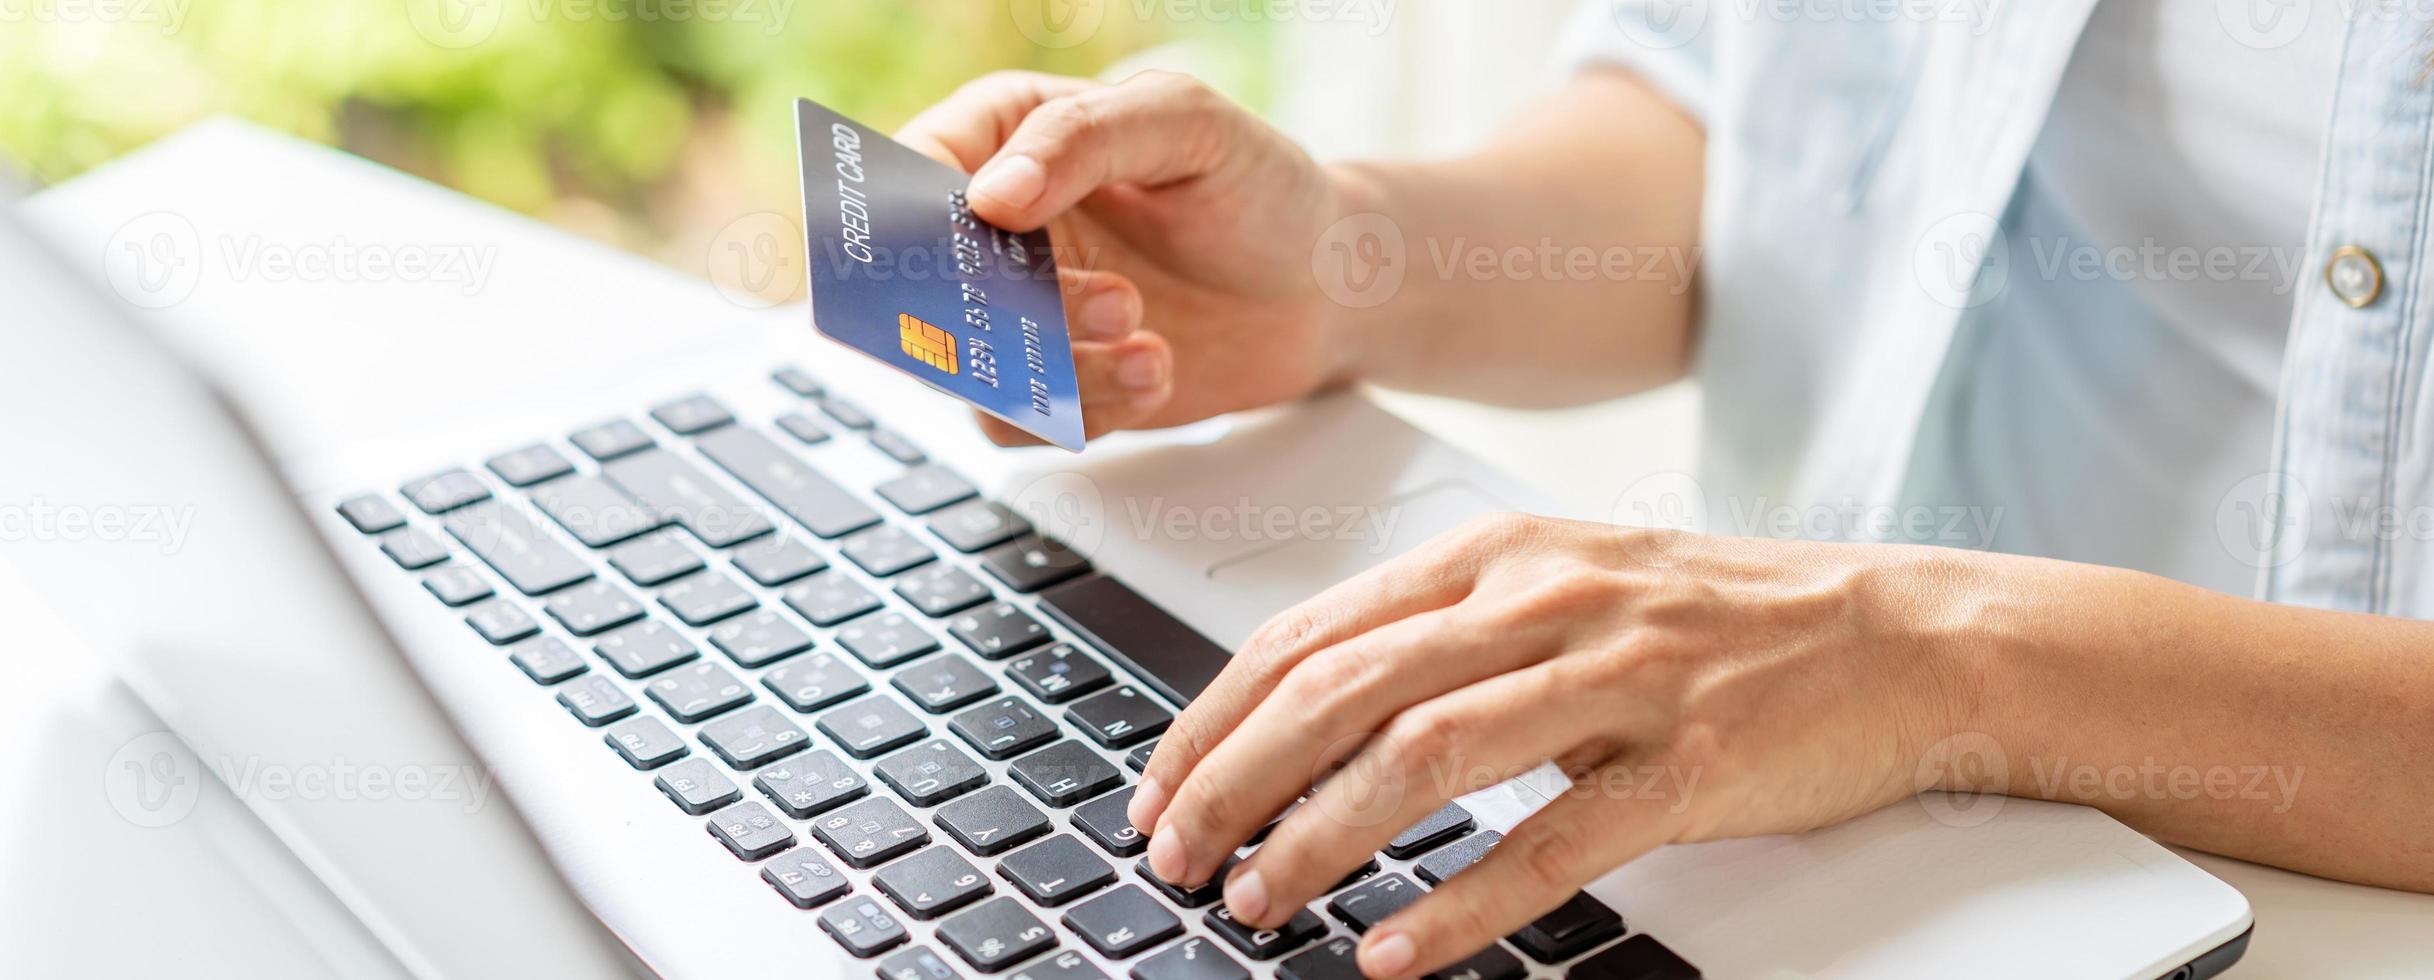 Young woman holding a credit card and using computer for making online payment shopping photo